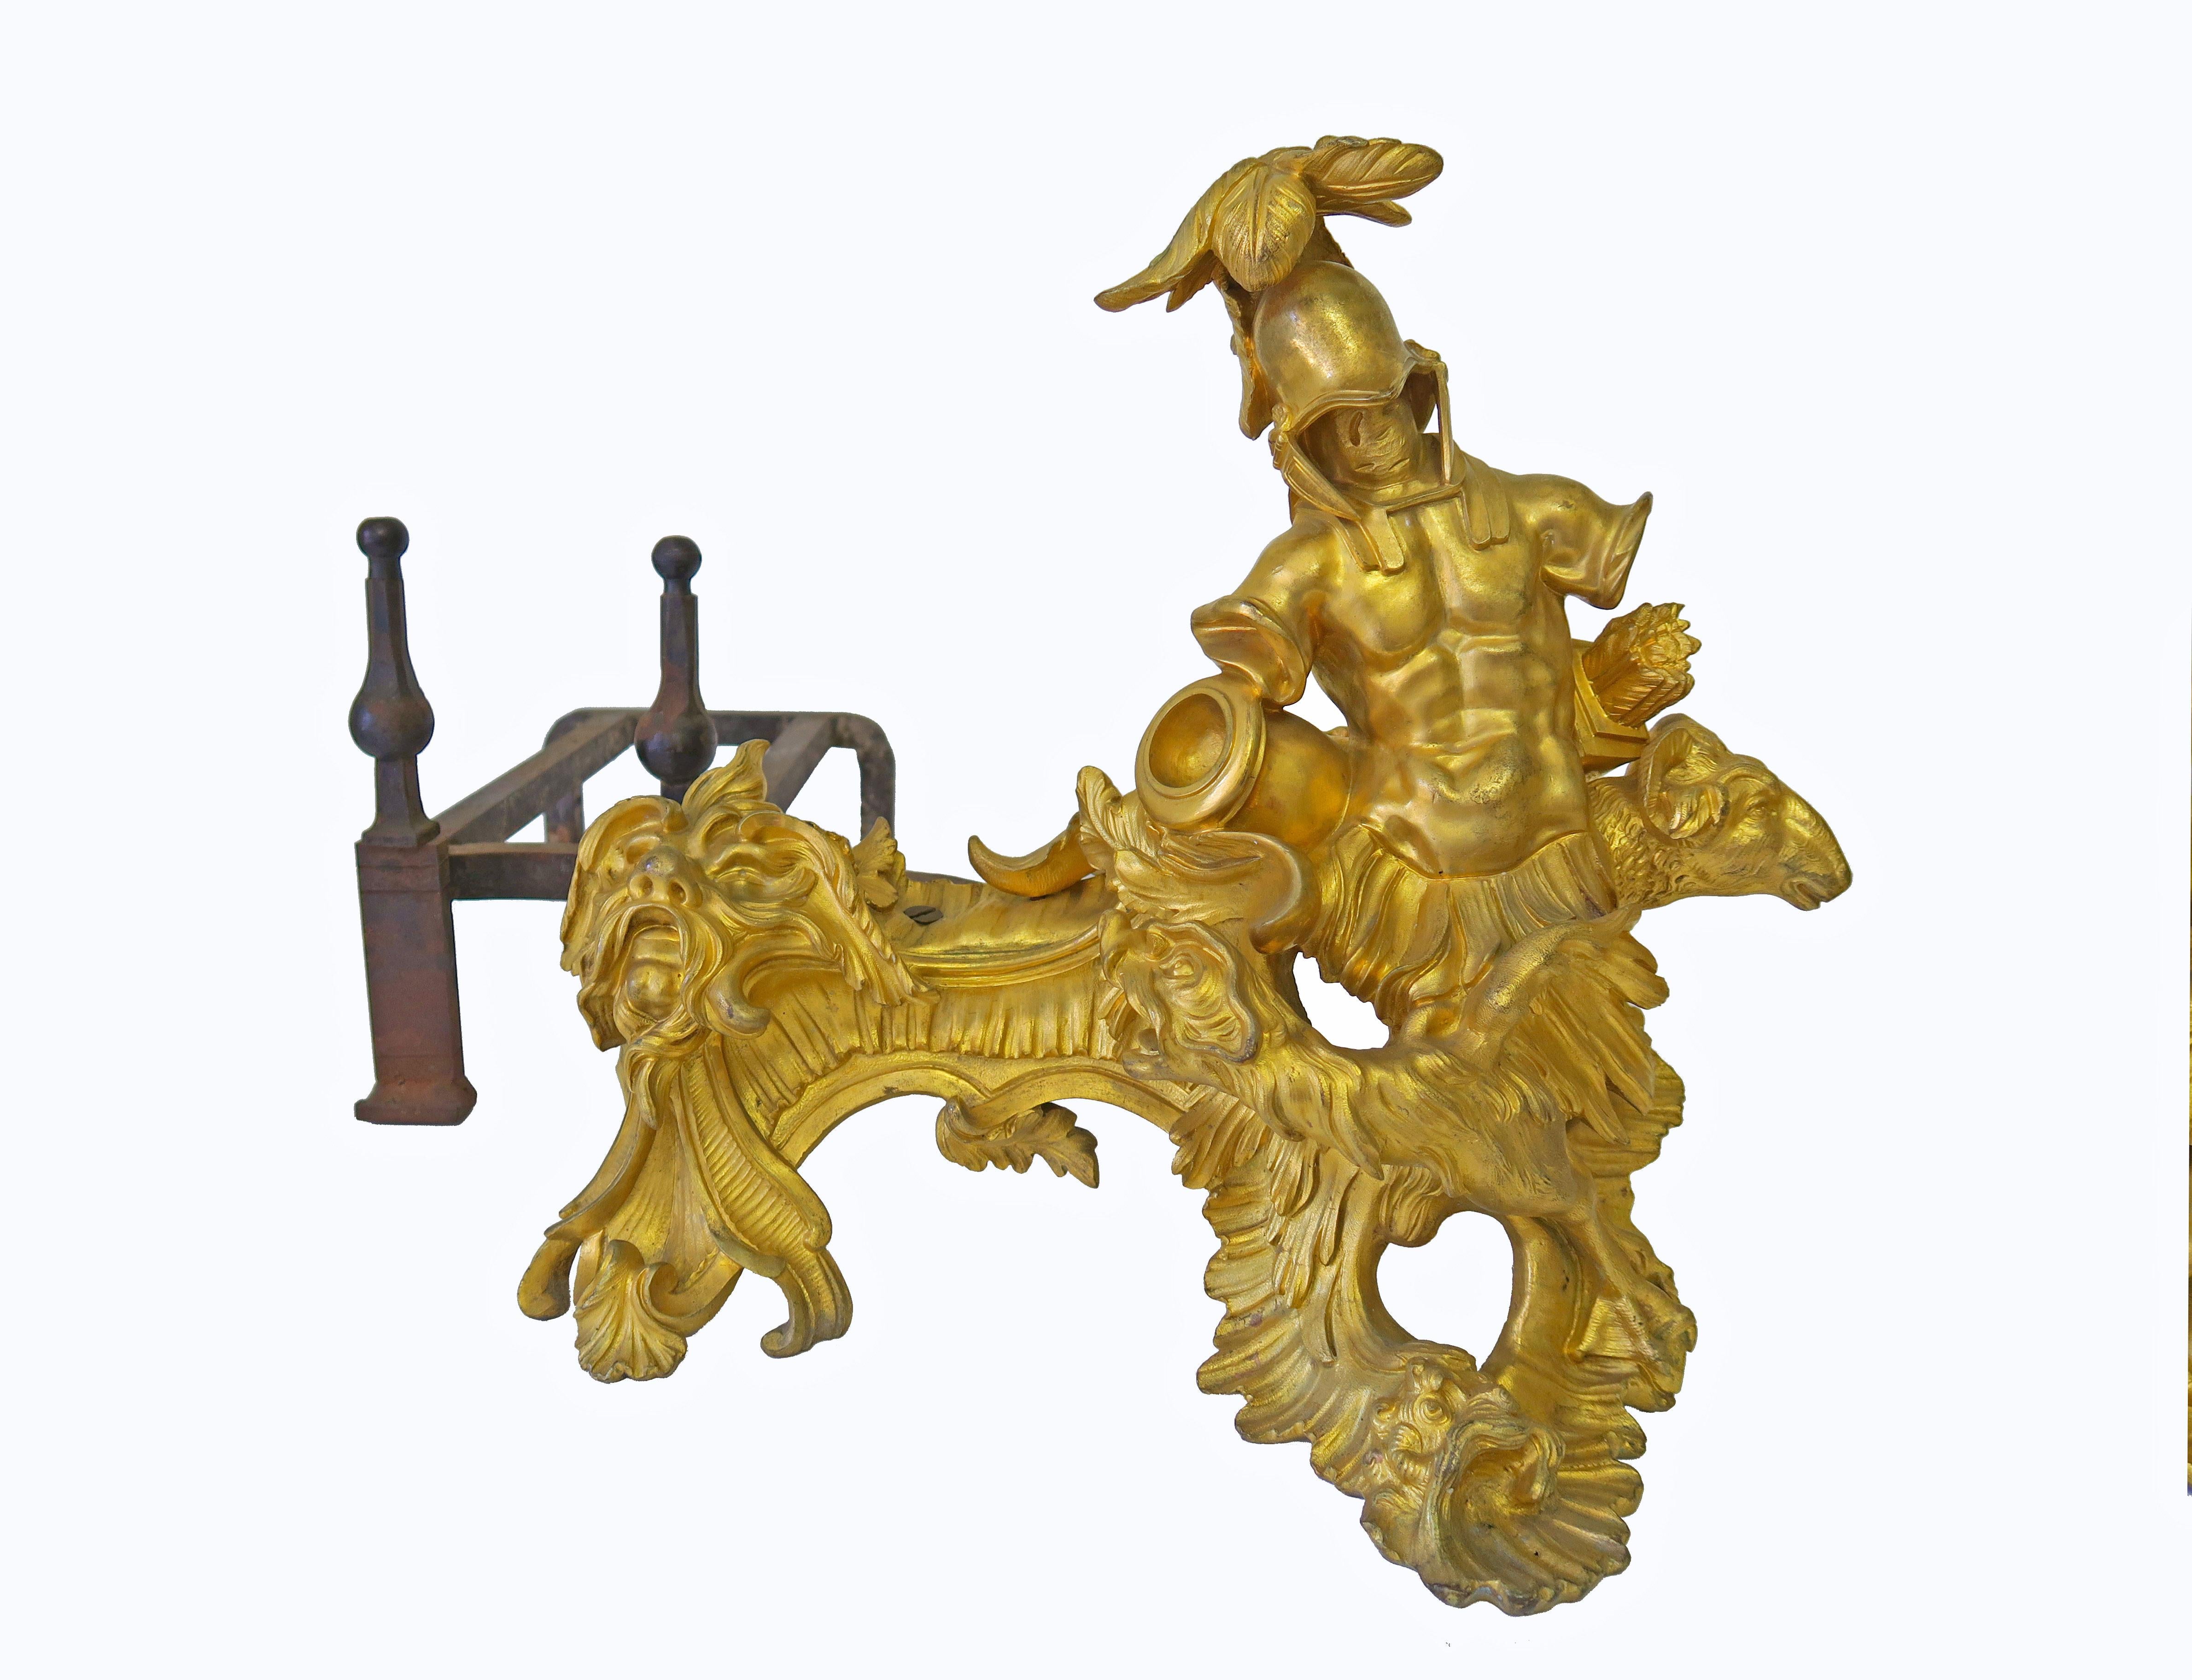 An important pair of 18th c. French Louis XV ormolu chenets. Each cast as military trophy, one with the feathered Turban, canon and boar, the other with a feathered helmet, quiver and ram, supported by cast-iron billet bar. An 18th century pair of